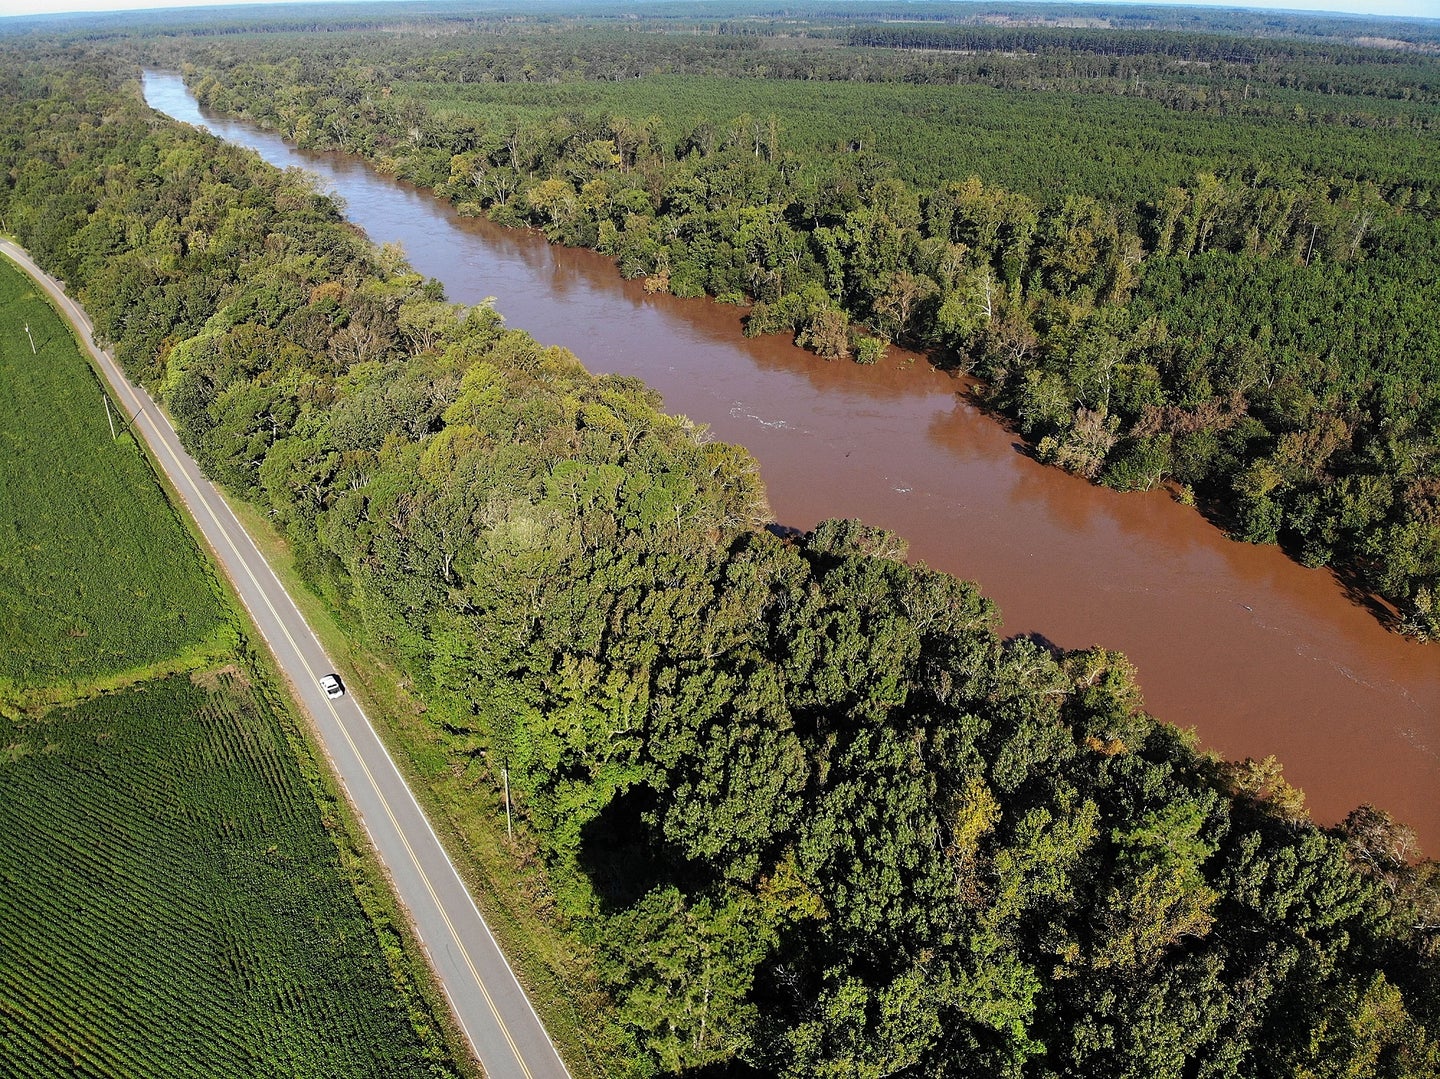 Cape Fear River in North Carolina, which is polluted by PFAS, seen from above after a storm